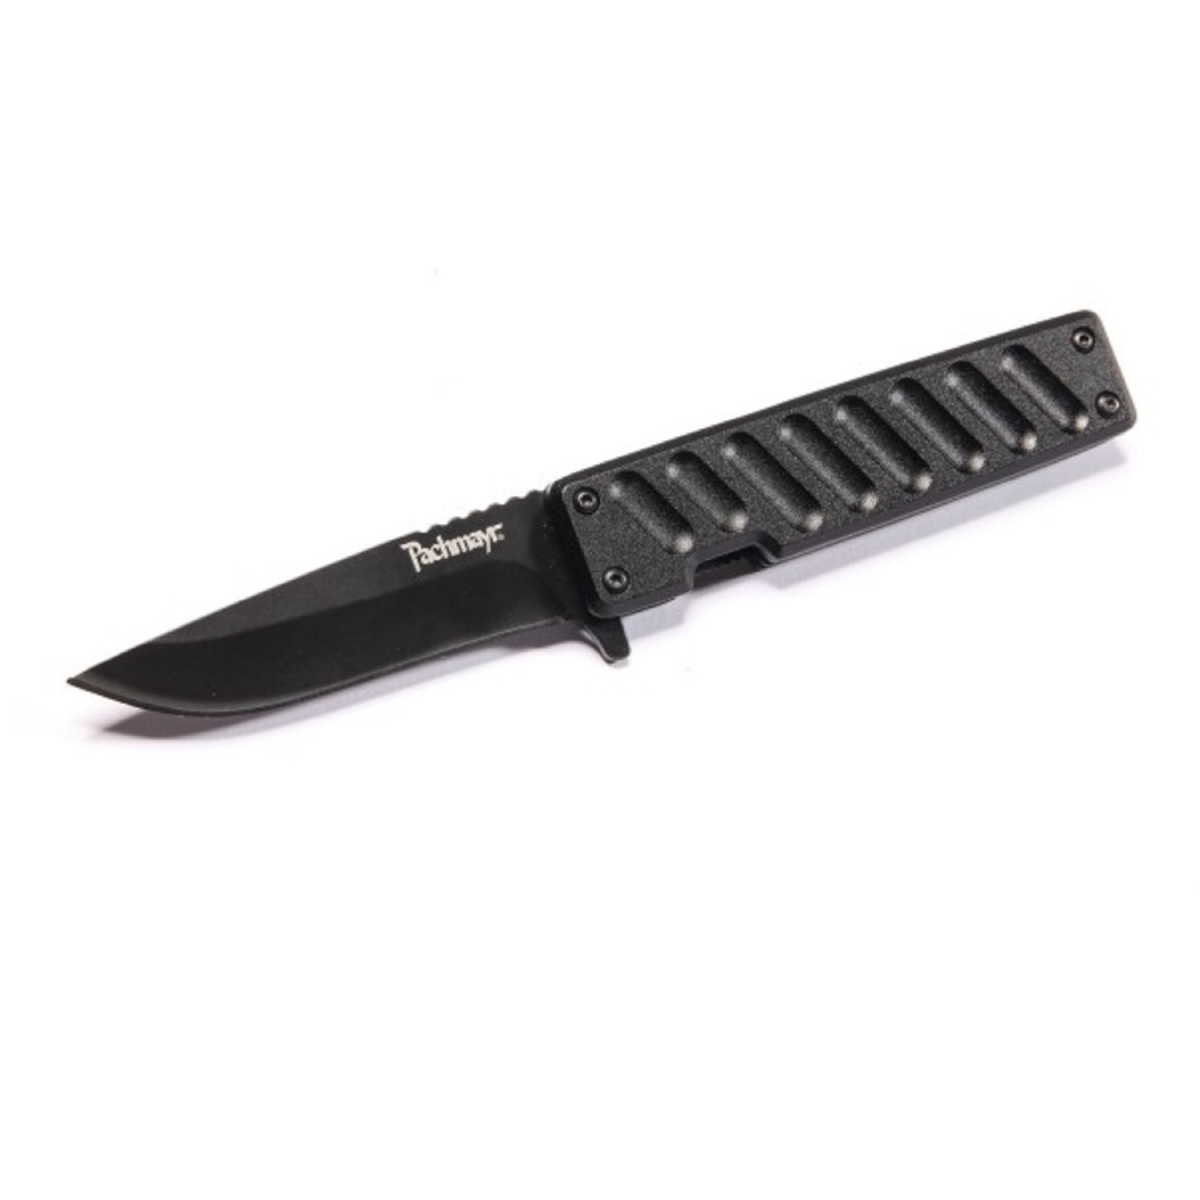 4019397 3 In. Blacktail Folder Black Knife Blade With Aluminum Handle